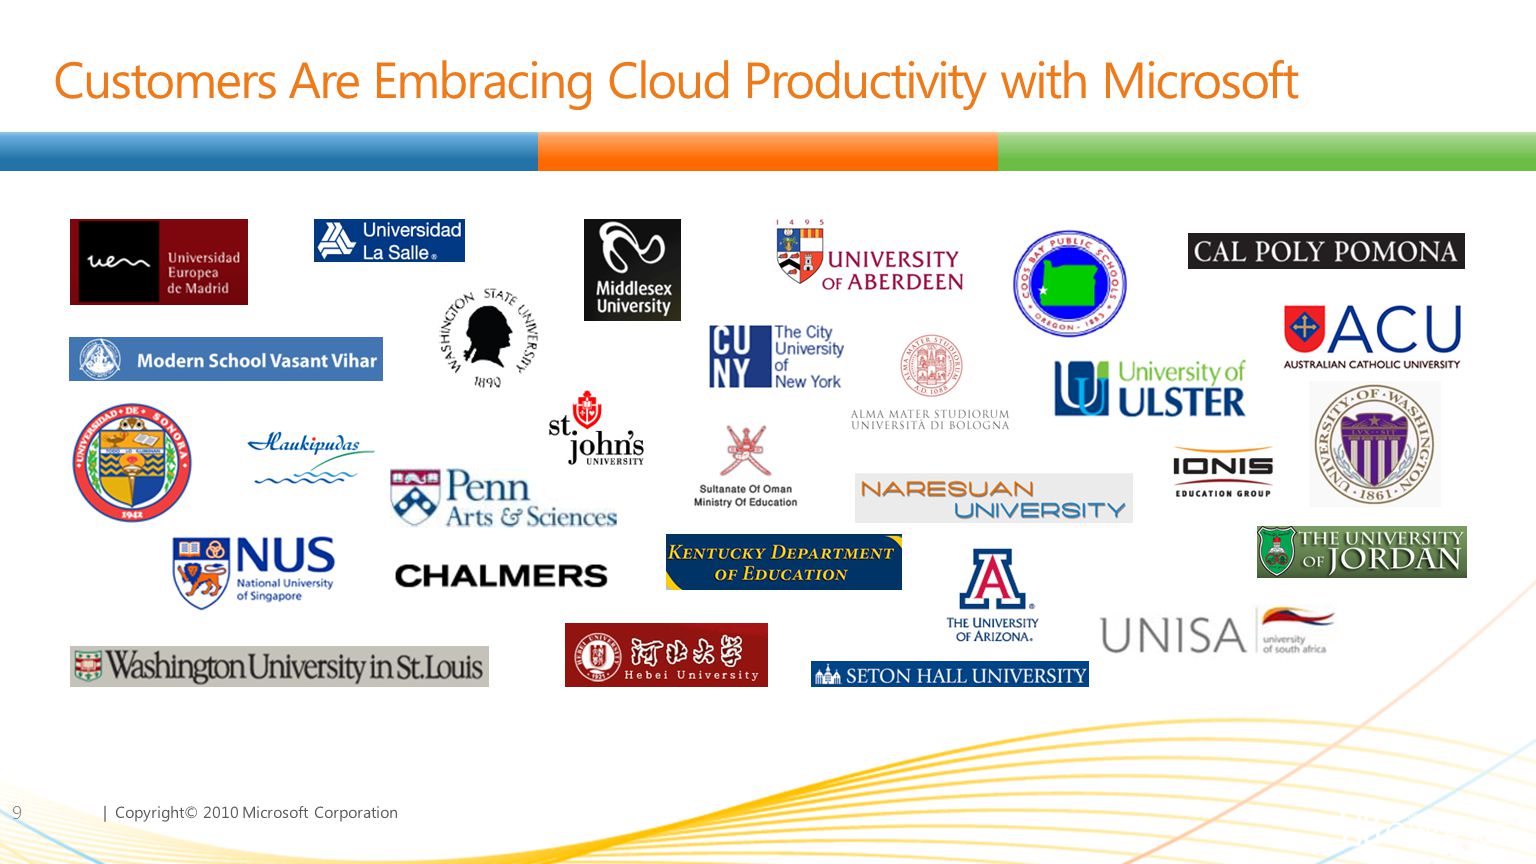 Customers Are Embracing Cloud Productivity with Microsoft